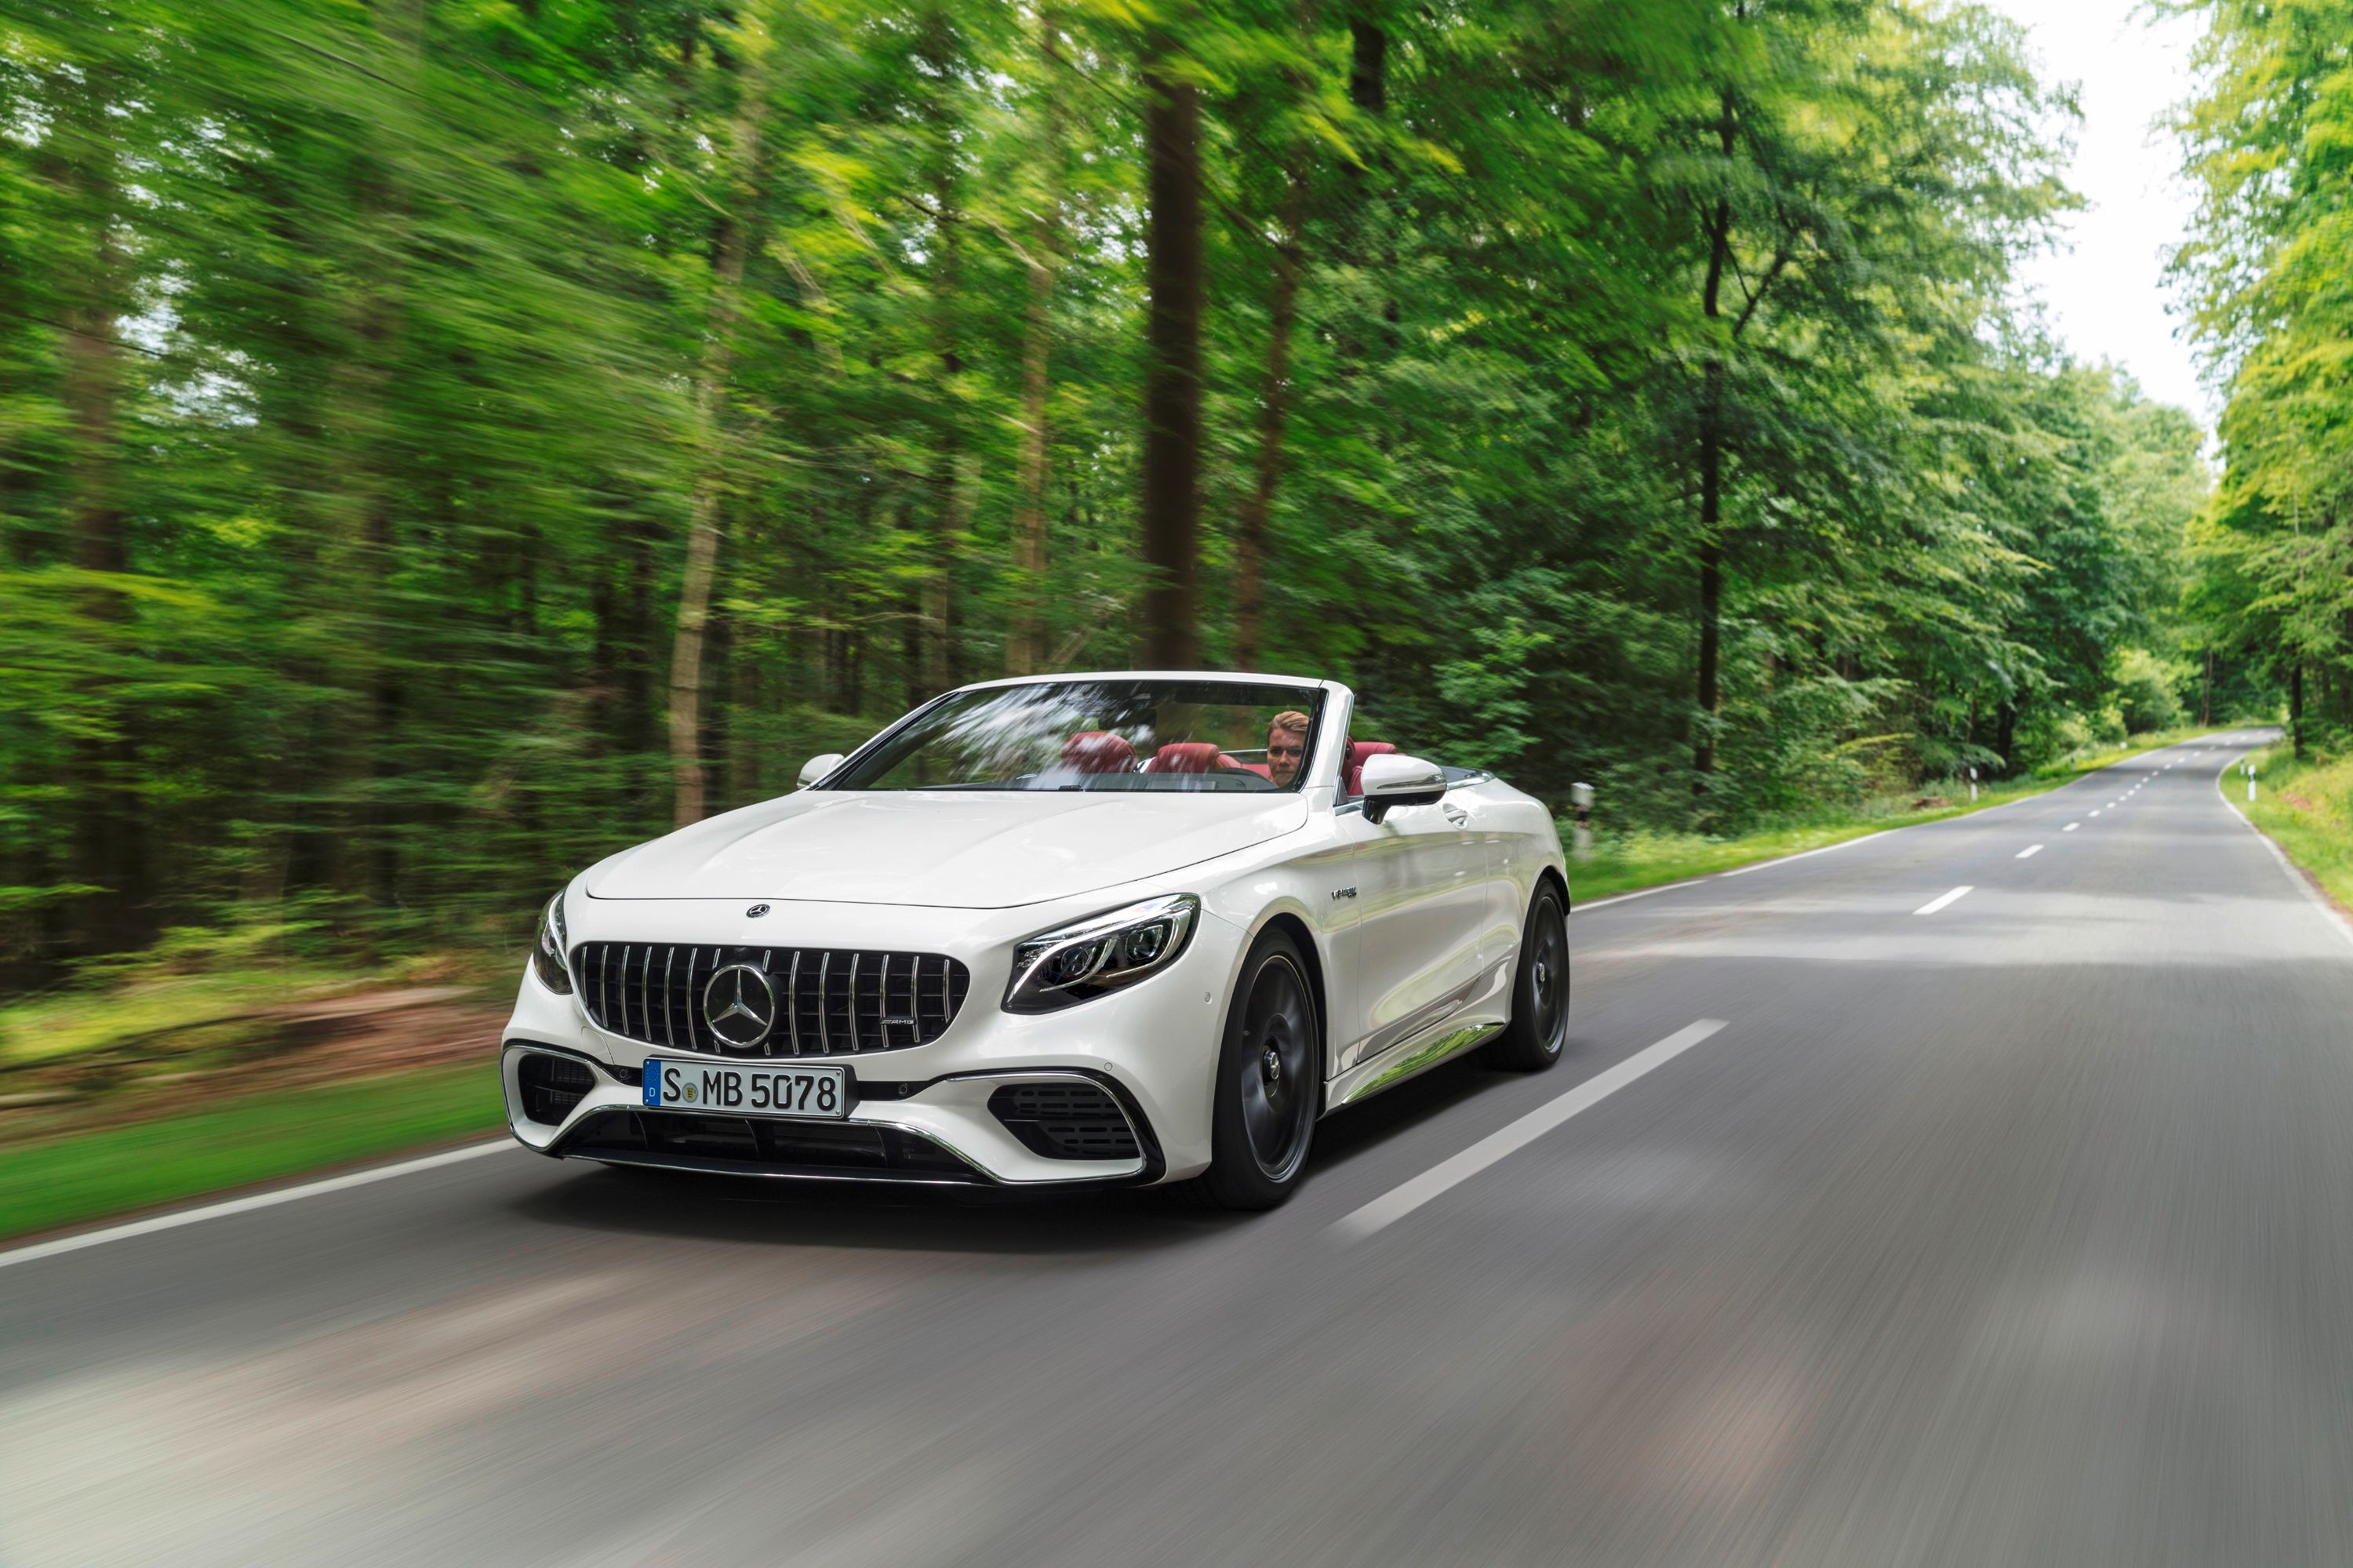 2021 Mercedes-AMG S63 Convertible